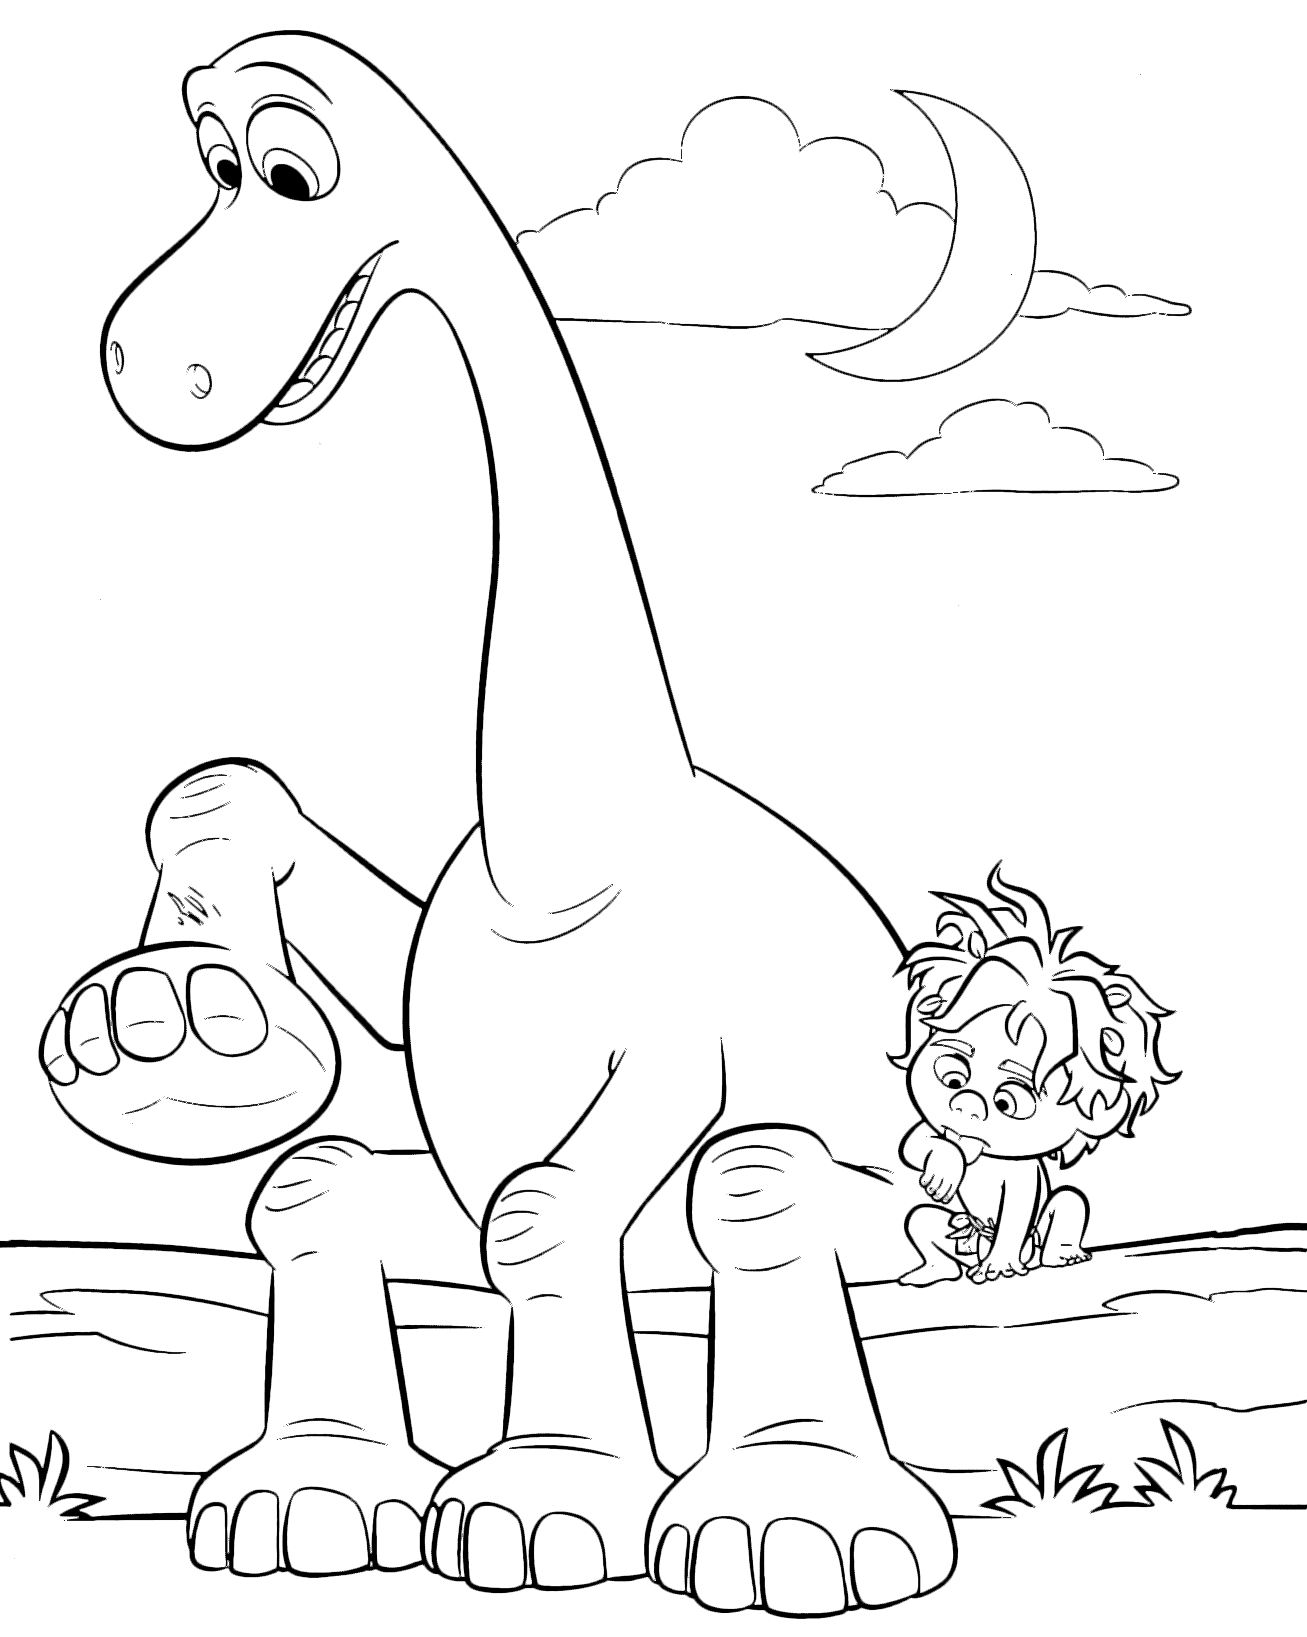 Arlo and Spot lick wounds Coloring Page